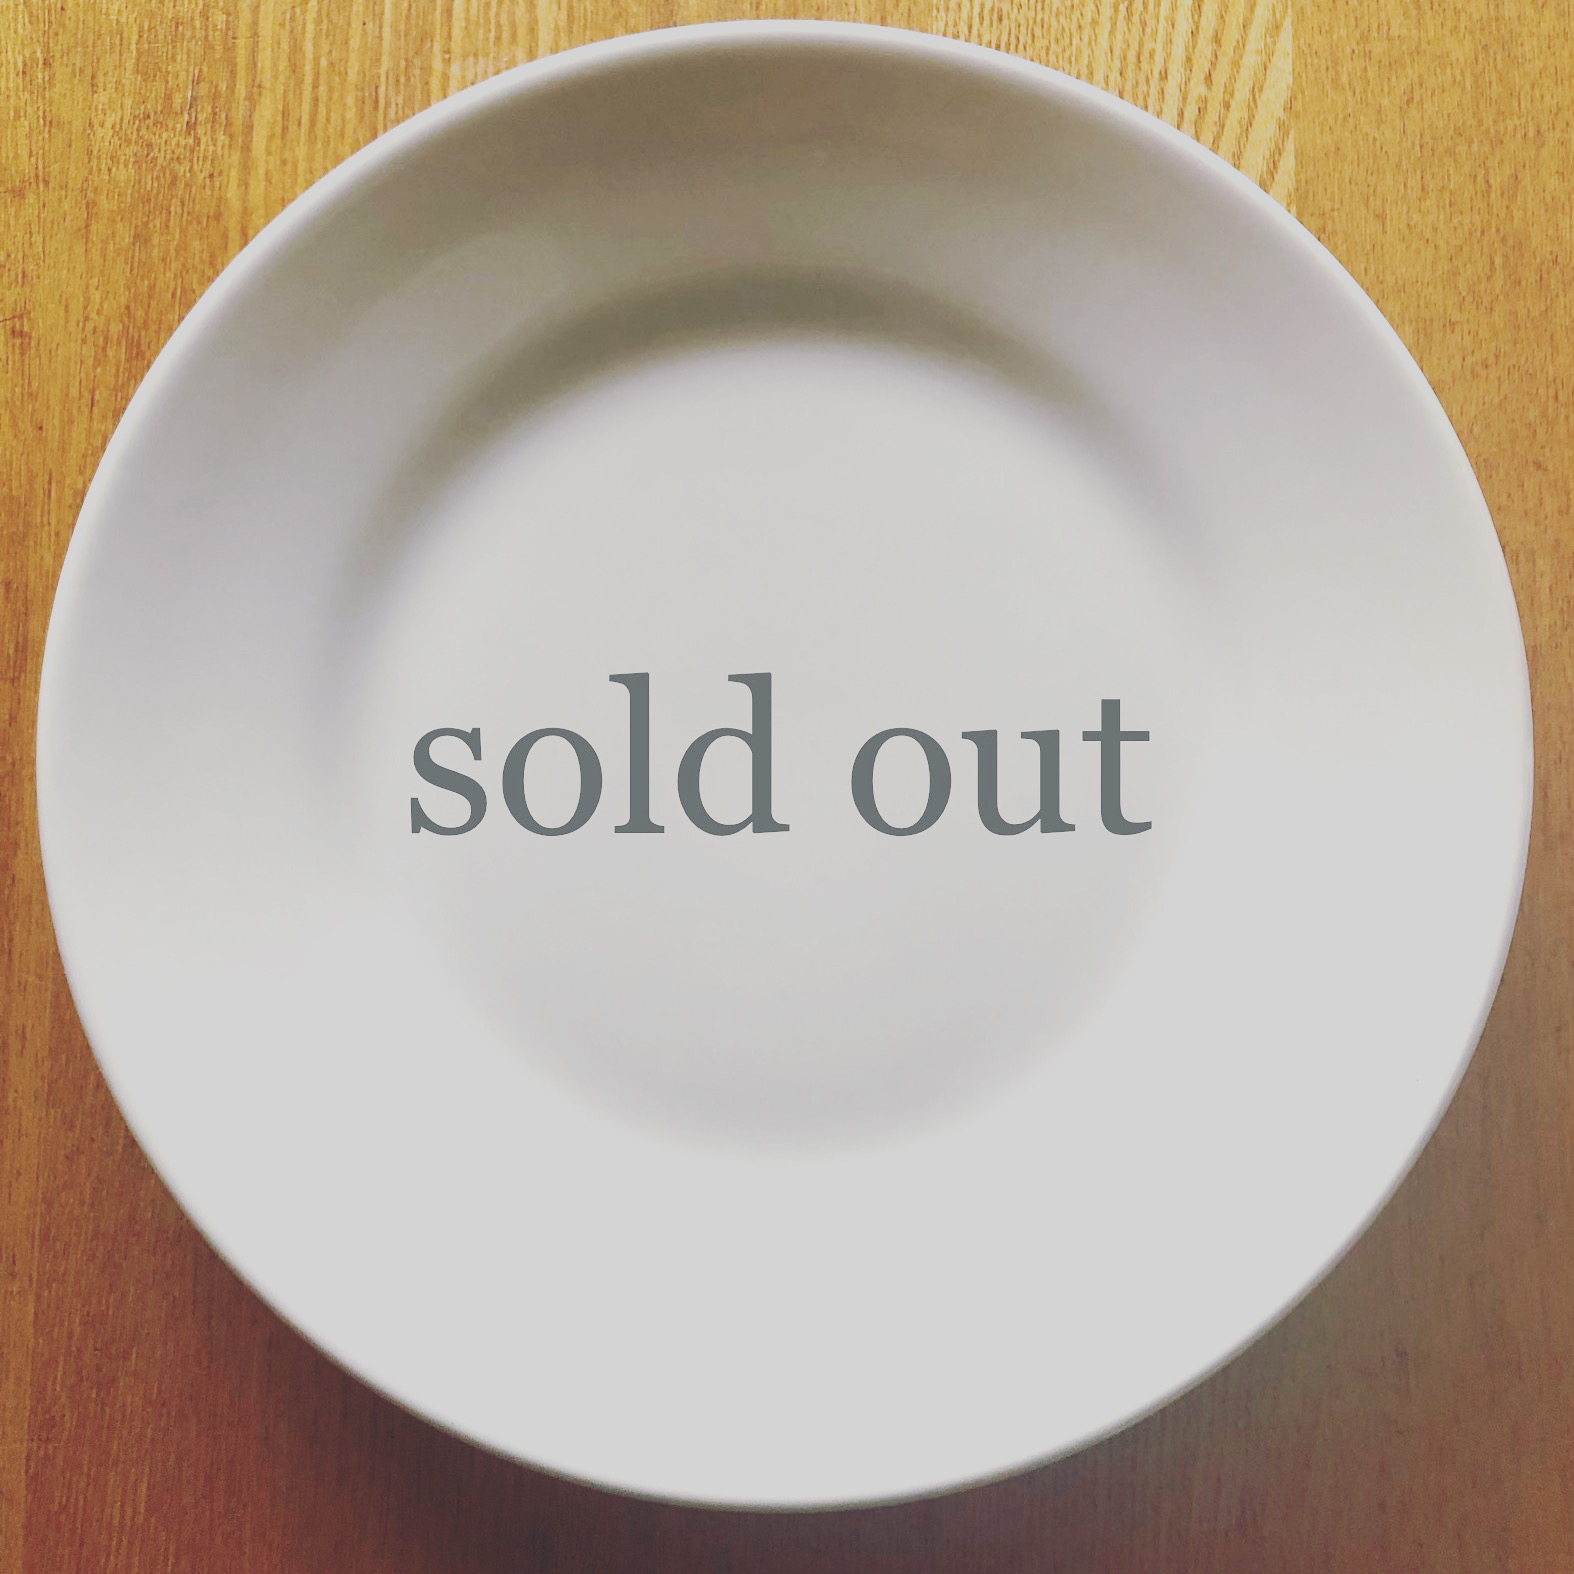 sold out...